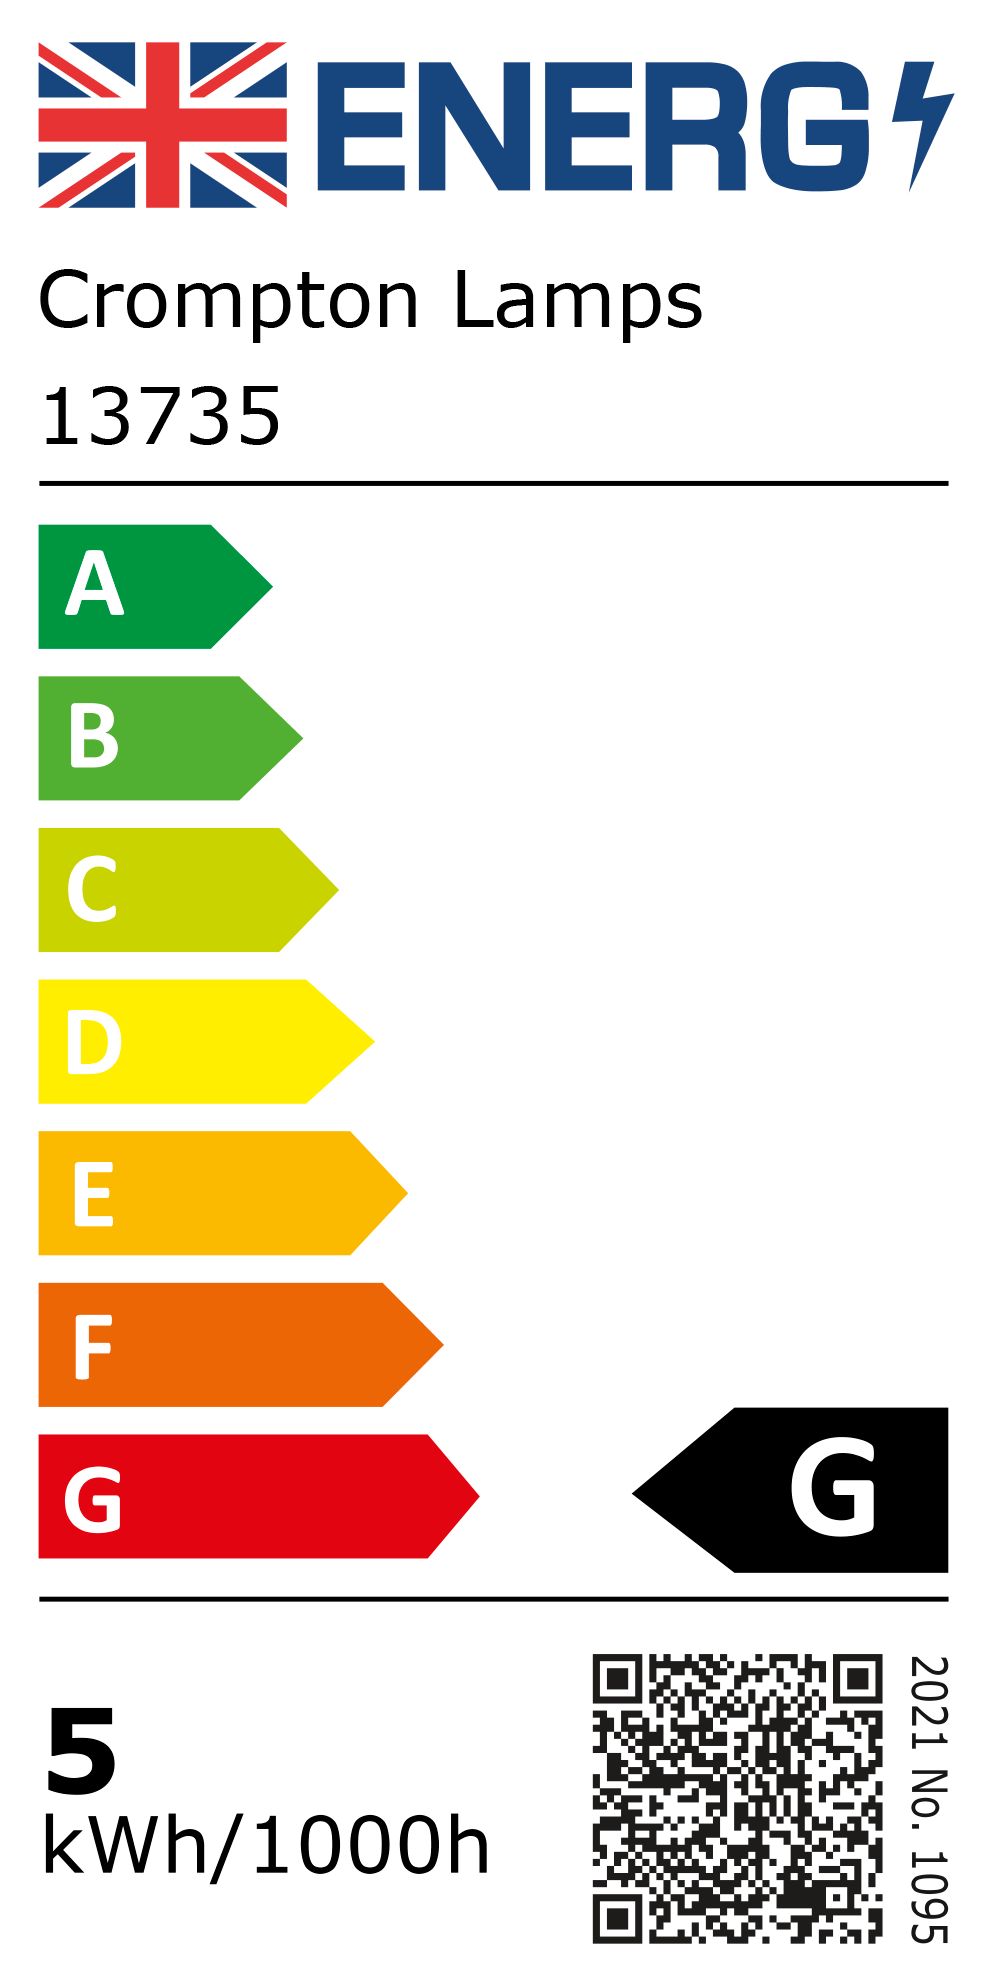 New 2021 Energy Rating Label: Stock Code 13735